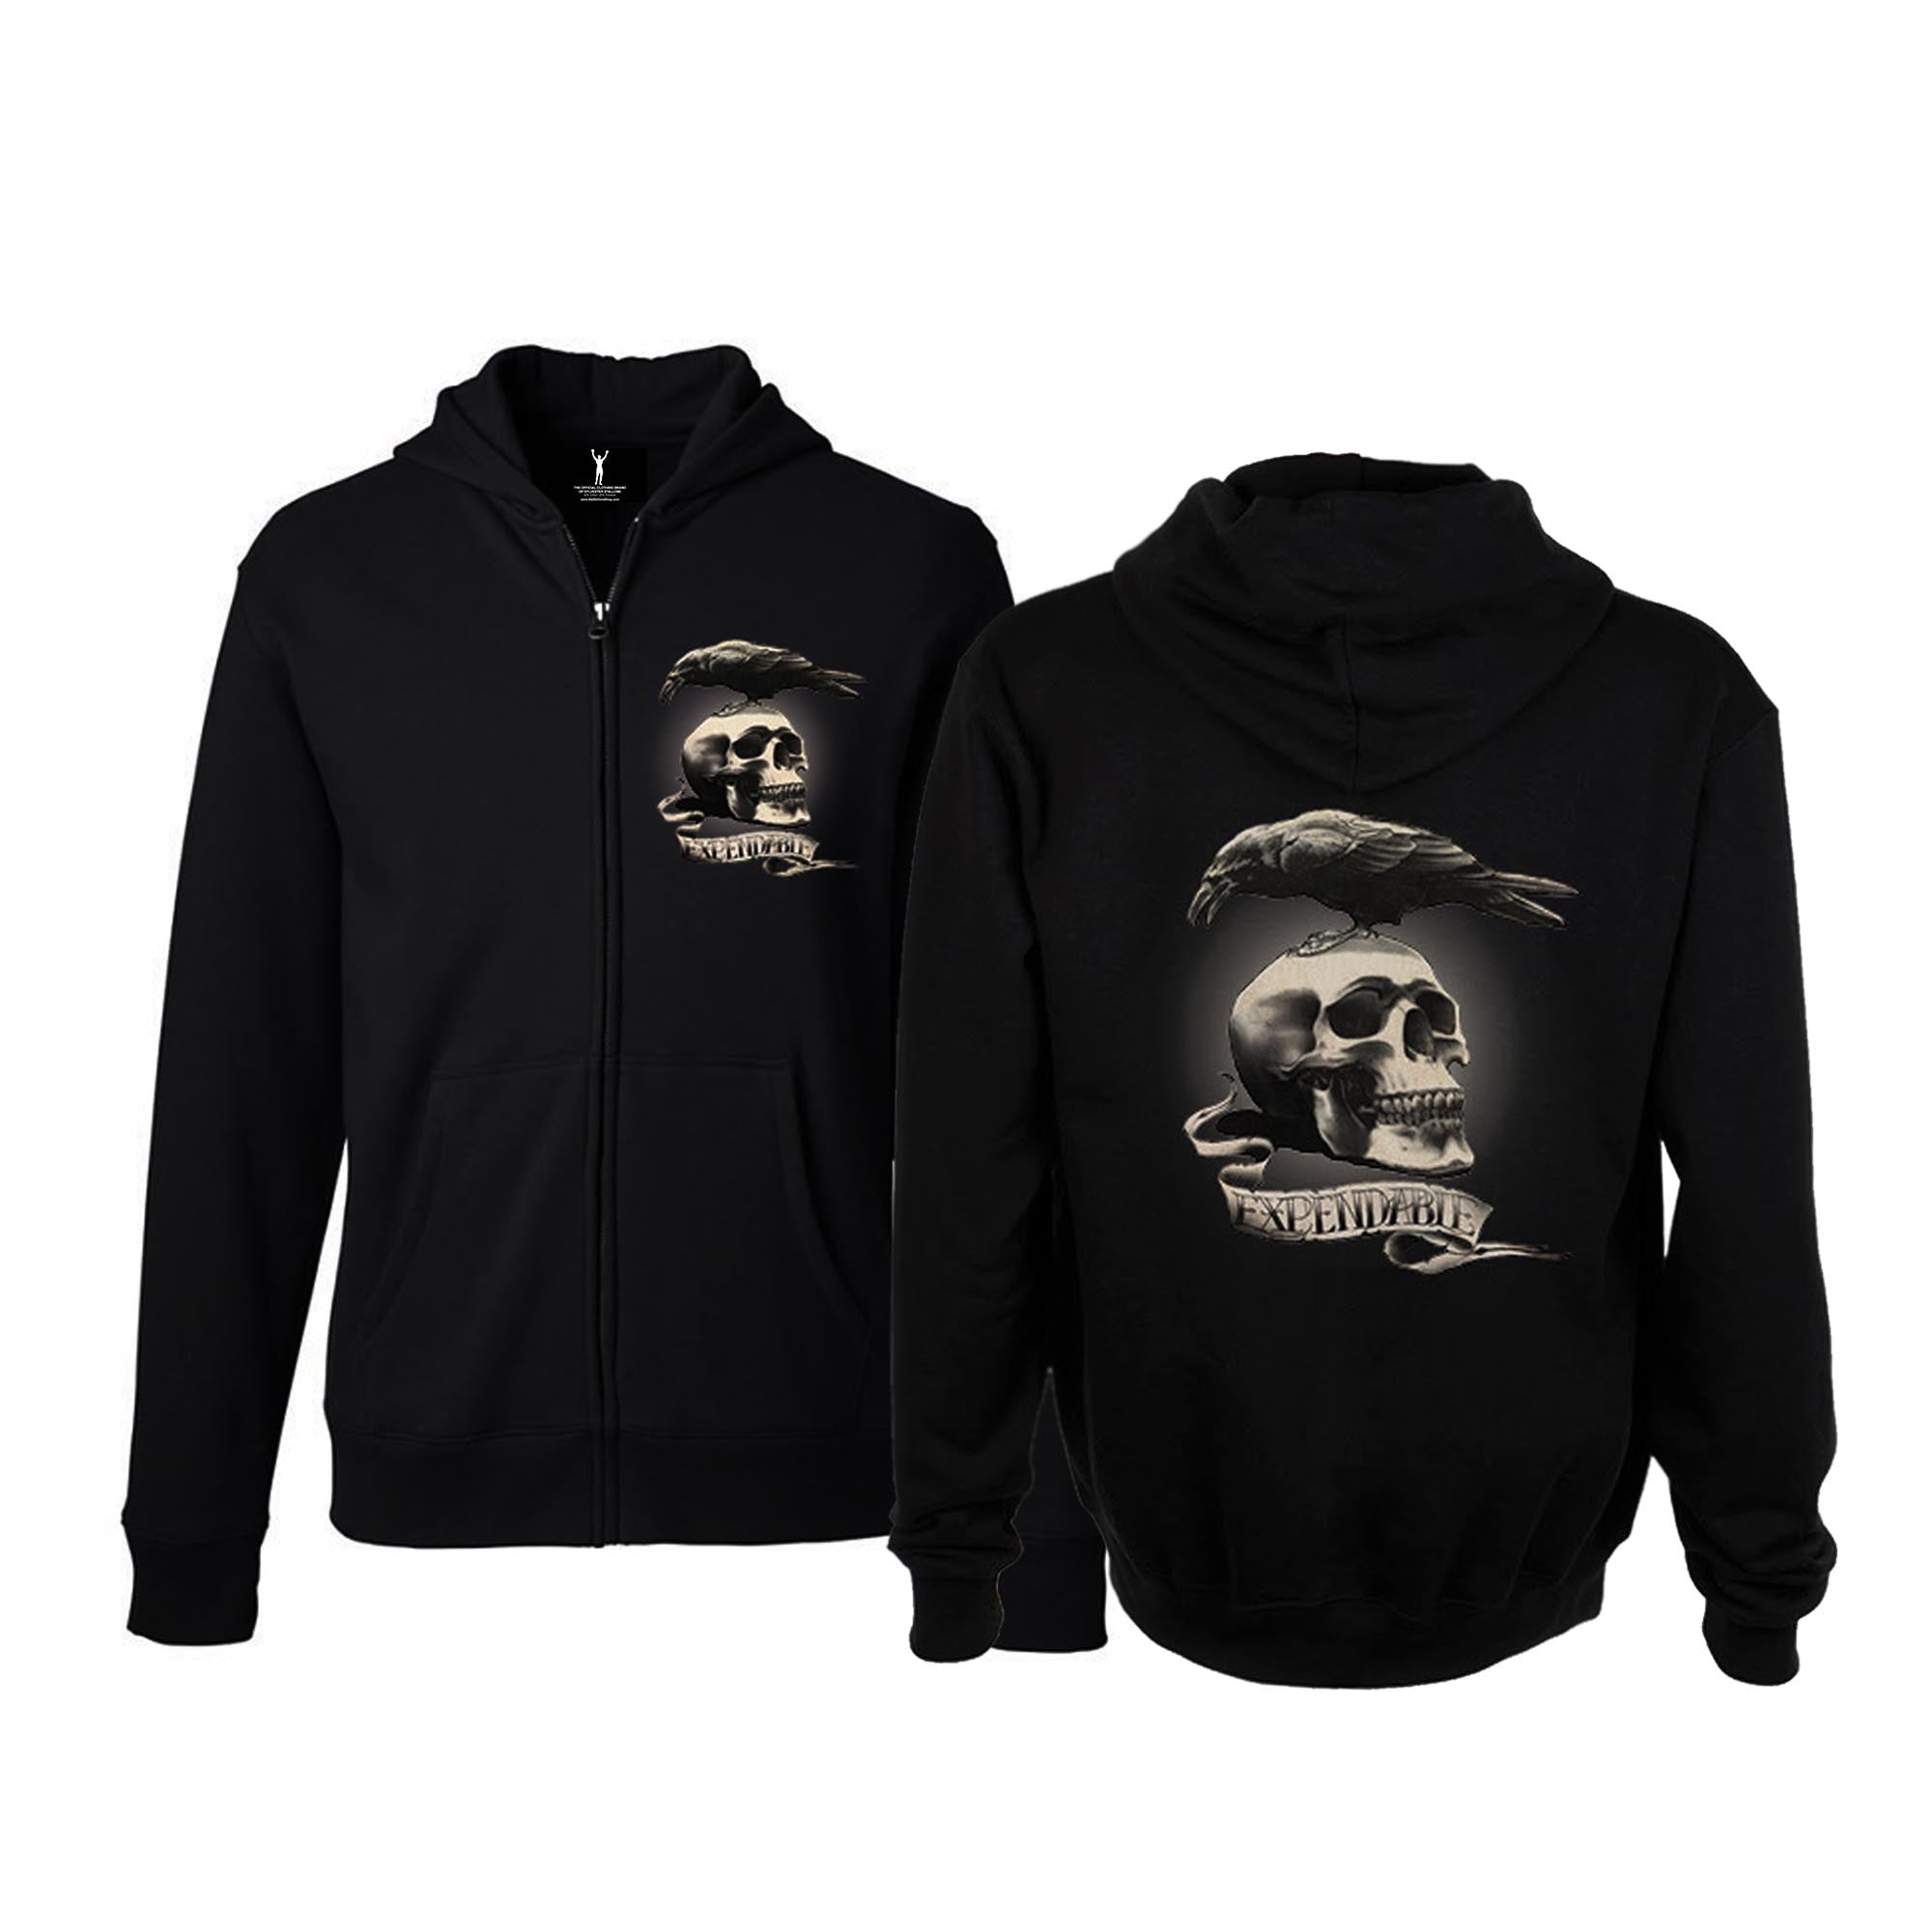 The Expendables Zip Up Hoodie